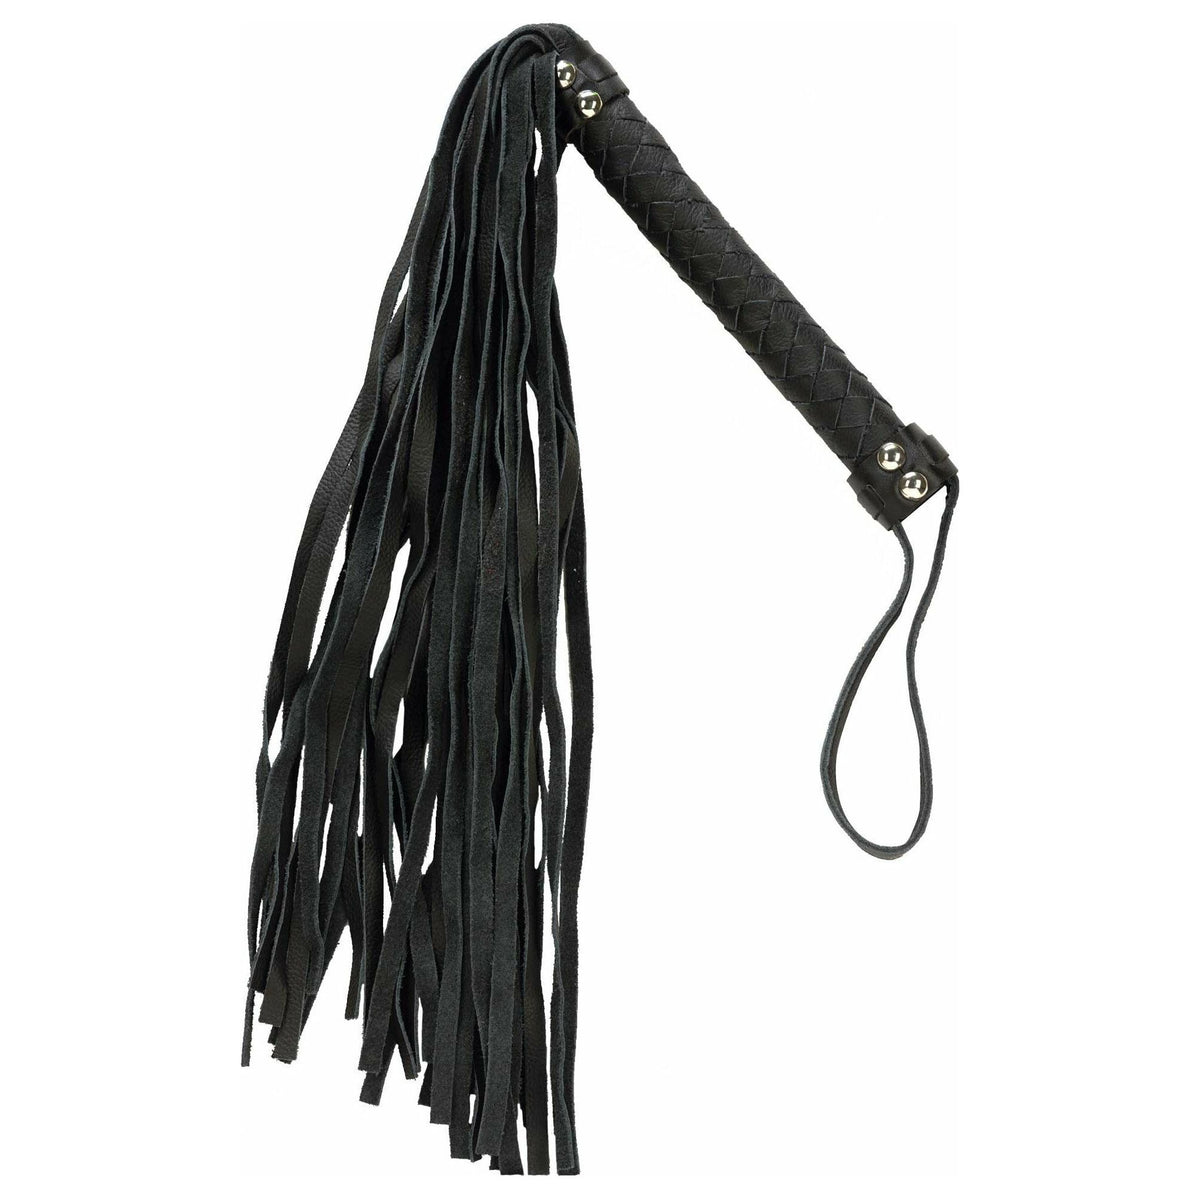 Punishment Black Whip with Black handle